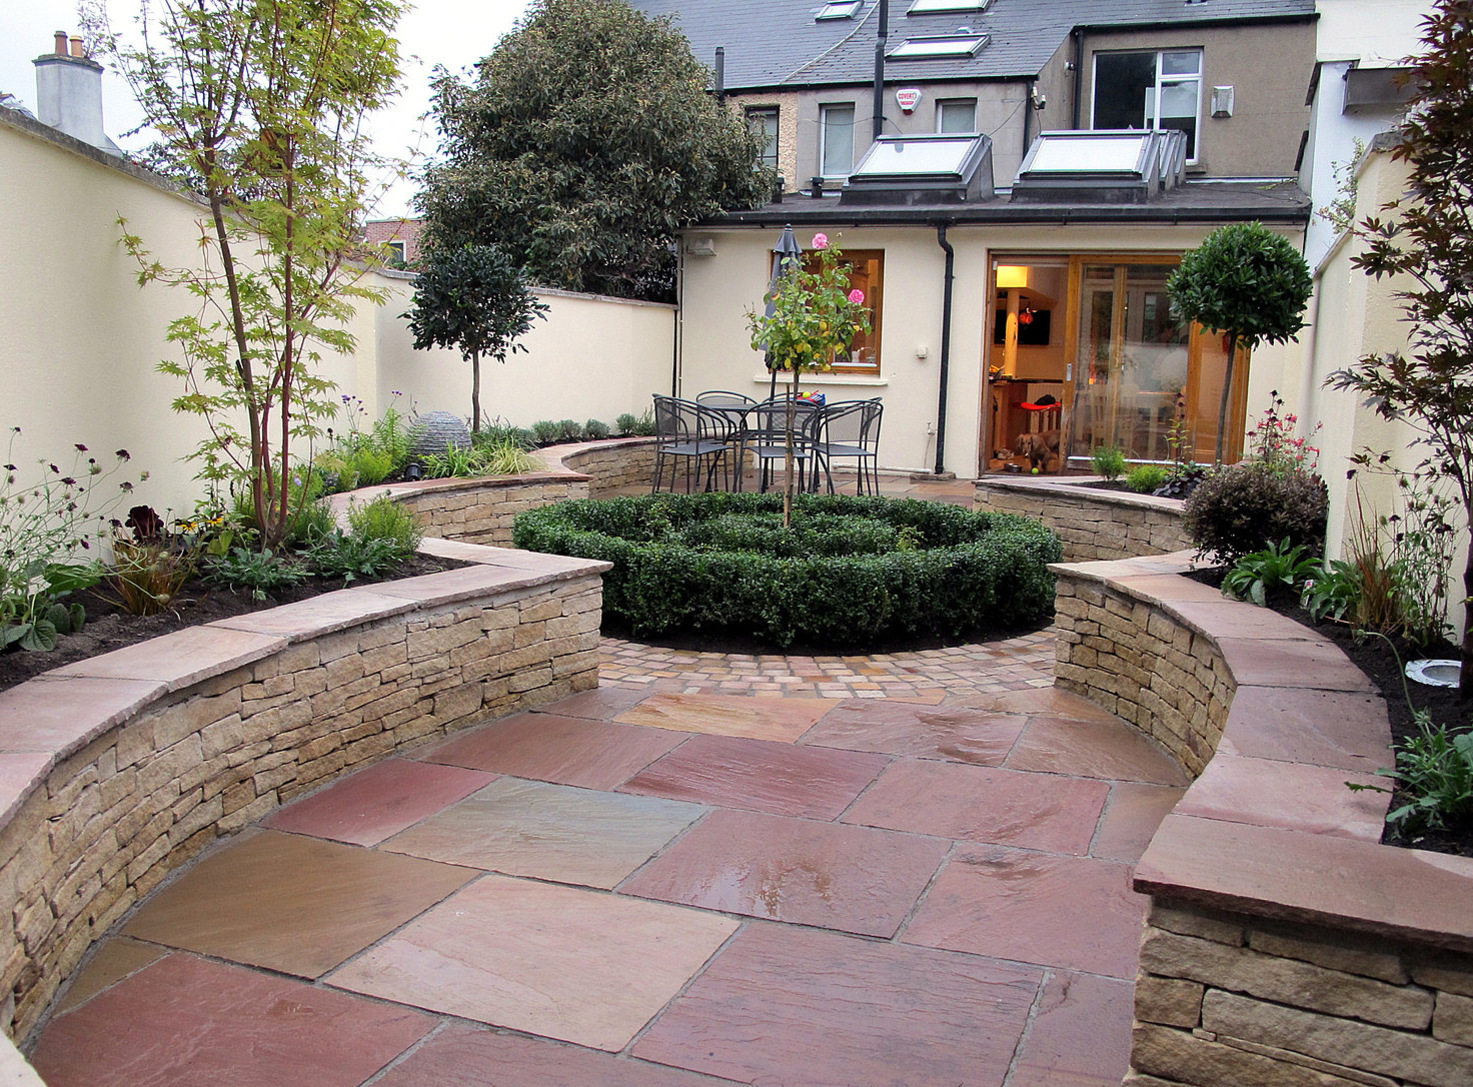 An attractive concentric garden design incorporating central bed, patio and raised beds in Ranelagh garden |Owen Chubb Garden Design & Landscaping in Dublin 6